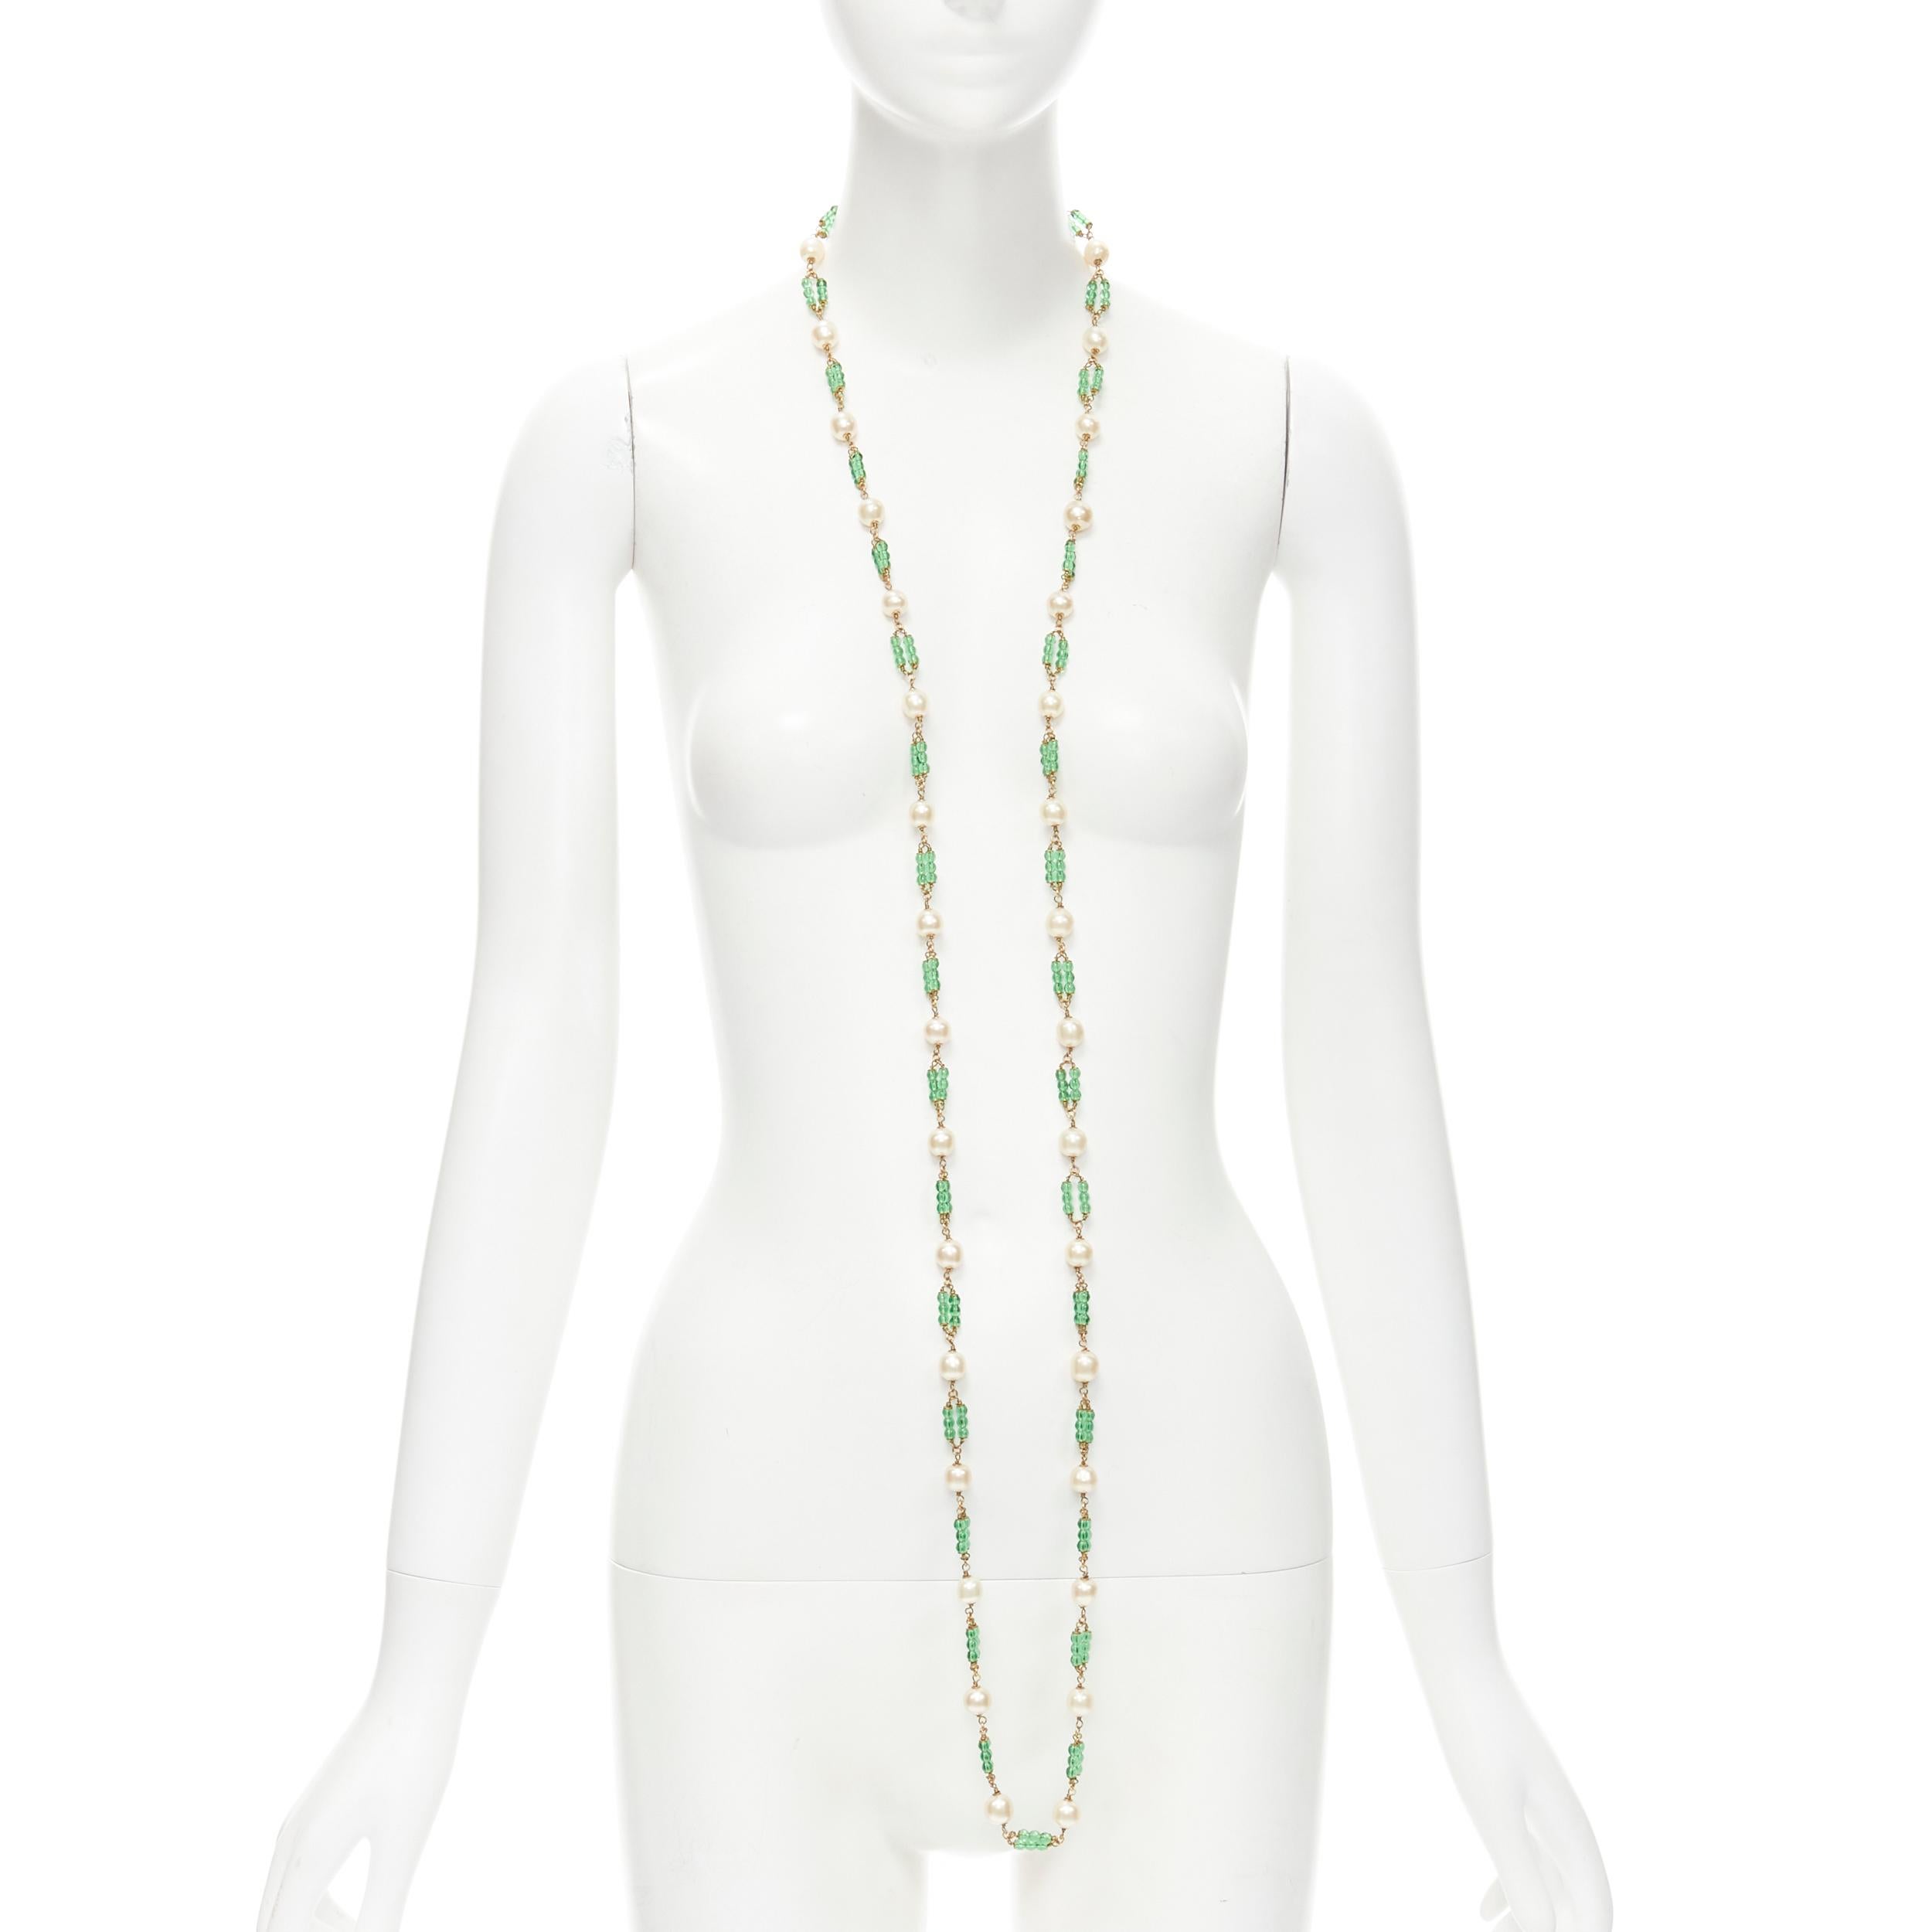 vintage CHANEL 93A green Gripoix poured glass beads faux Pearl sautoir necklace
Brand: Chanel
Designer: Karl Lagerfeld
Collection: 93A 
Material: Metal
Color: Gold
Pattern: Solid
Closure: Lobster Clasp
Extra Detail: Gold-tone metal chain. Faux pearl